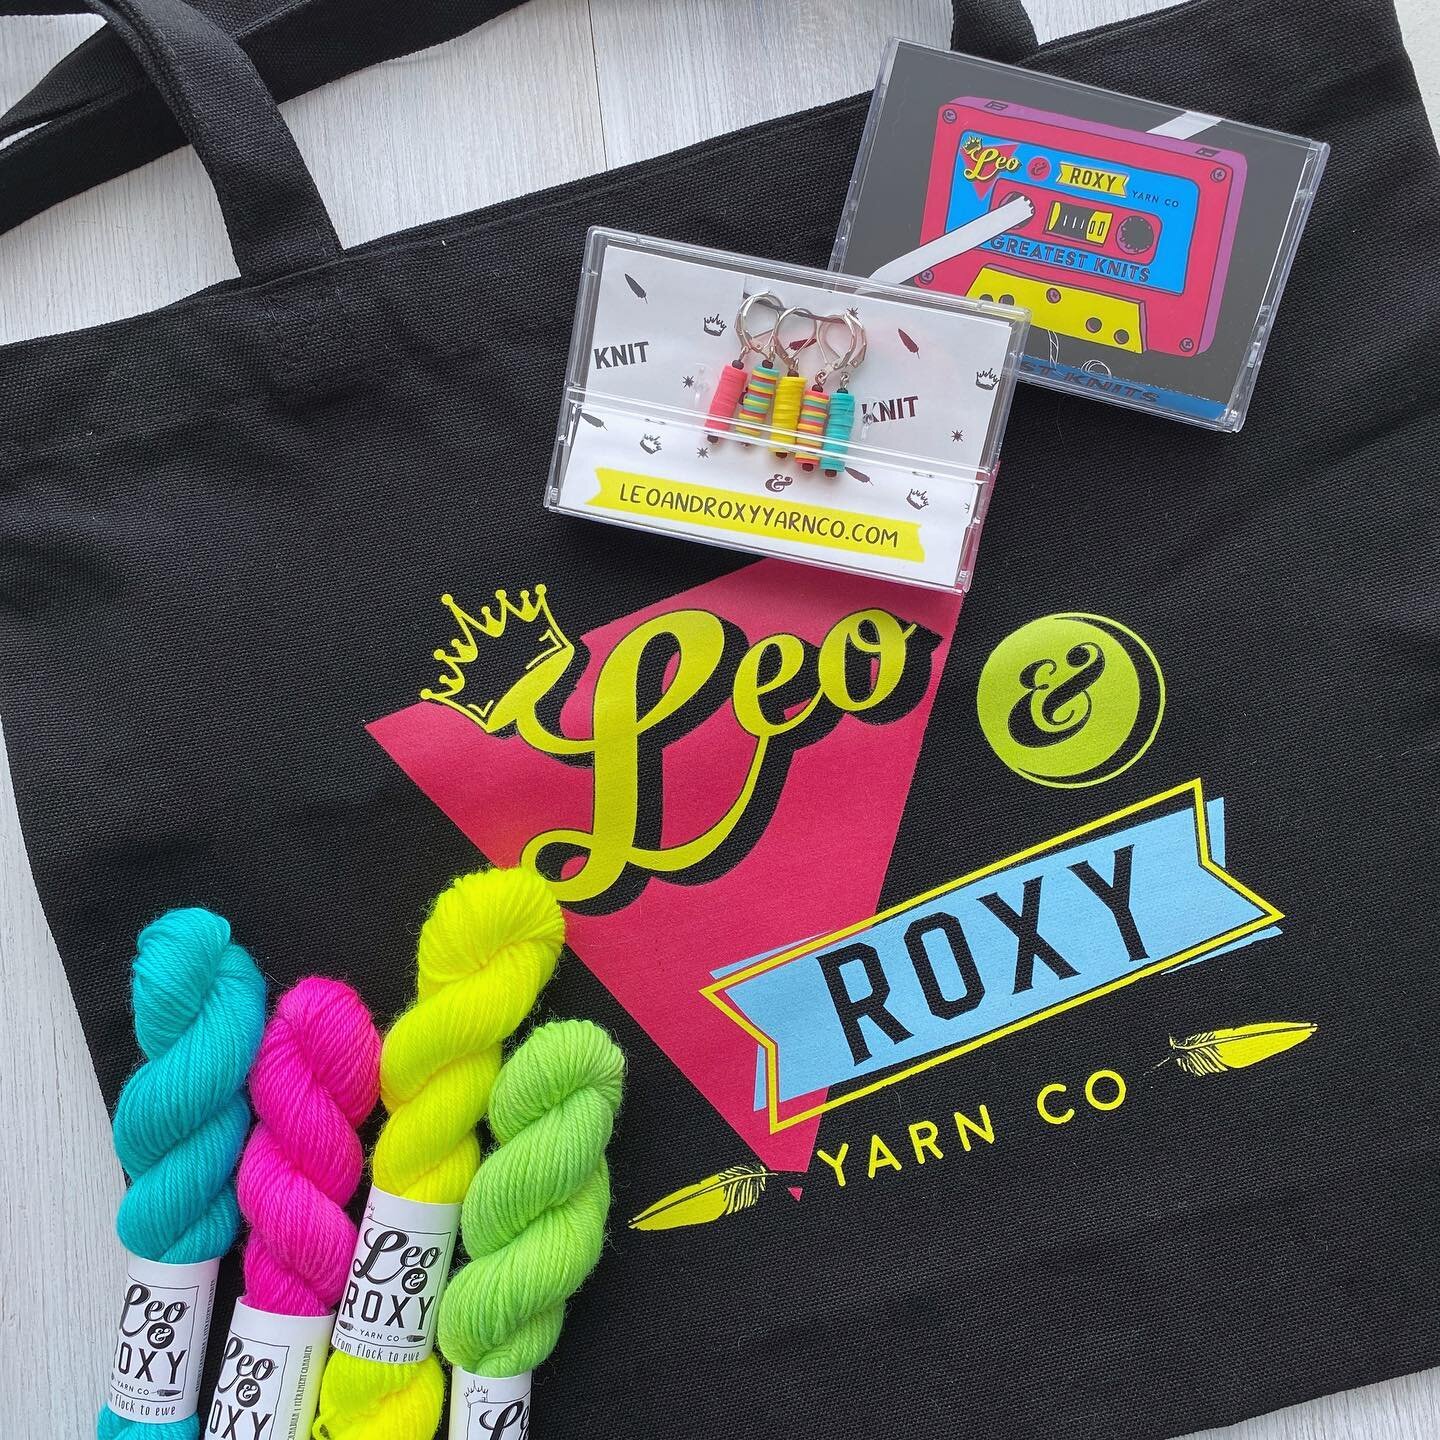 We decided to go for an 80&rsquo;s theme for this years shows. Loving the new 80&rsquo;s logo and all the bright colours!! Bags and stitch markers will be available for sale this weekend at Knit City Montreal. 

Only 4 more sleeps til Montreal @knitc